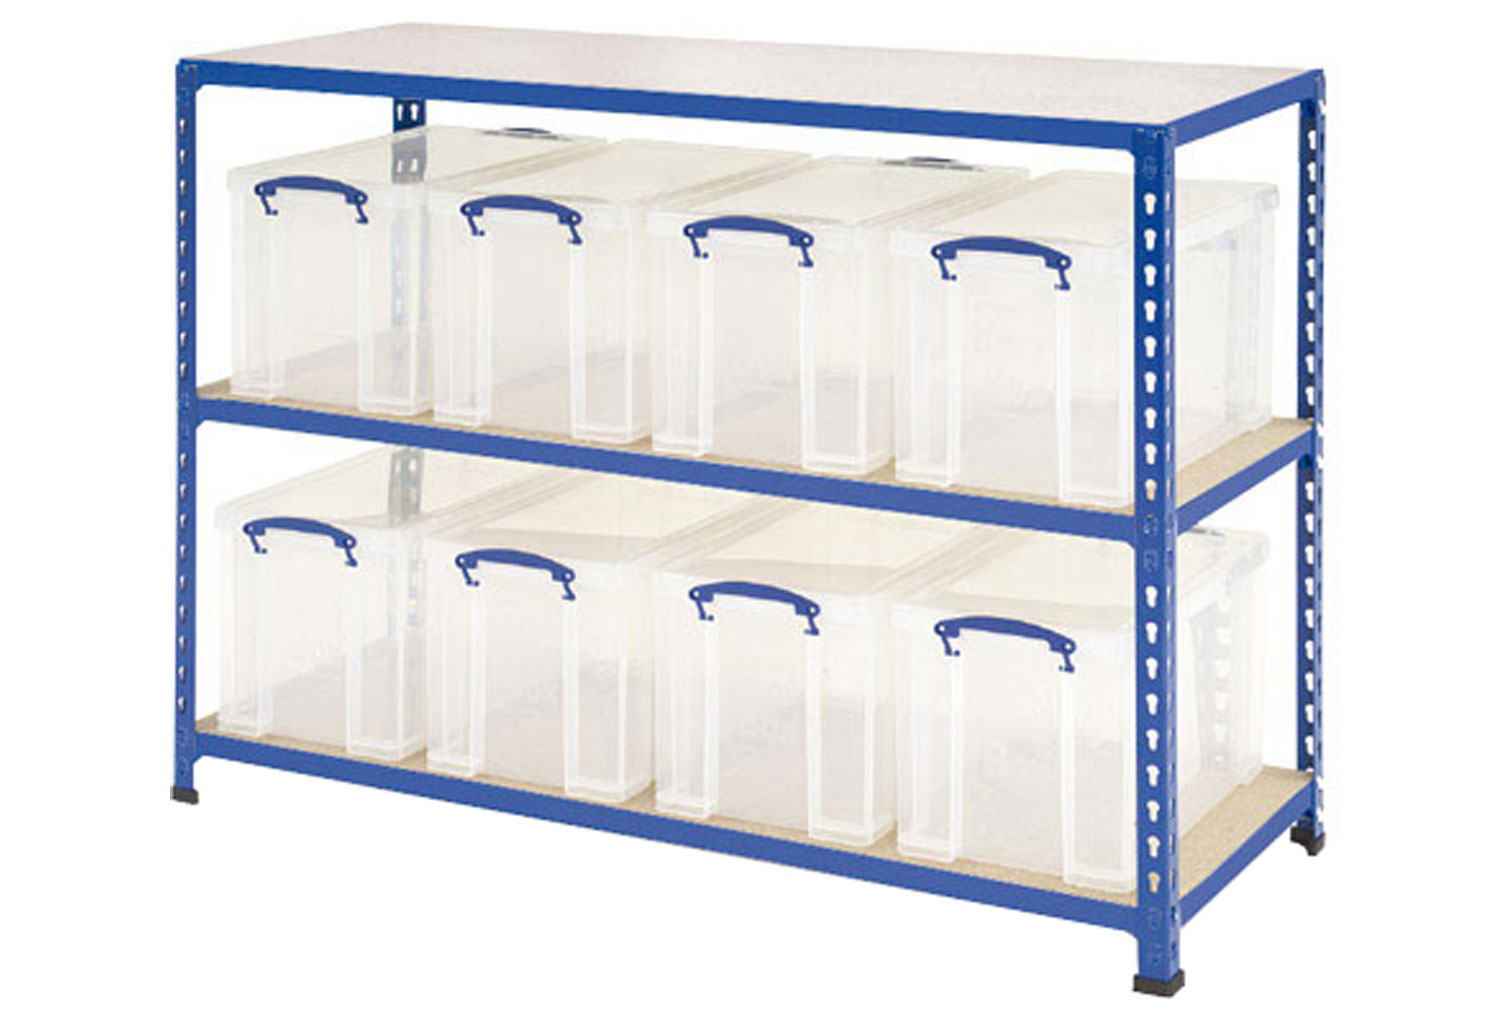 Rapid 2 Storage Bay With 8 x 24 Litre Clear Really Useful Boxes Clear, Blue, Express Delivery